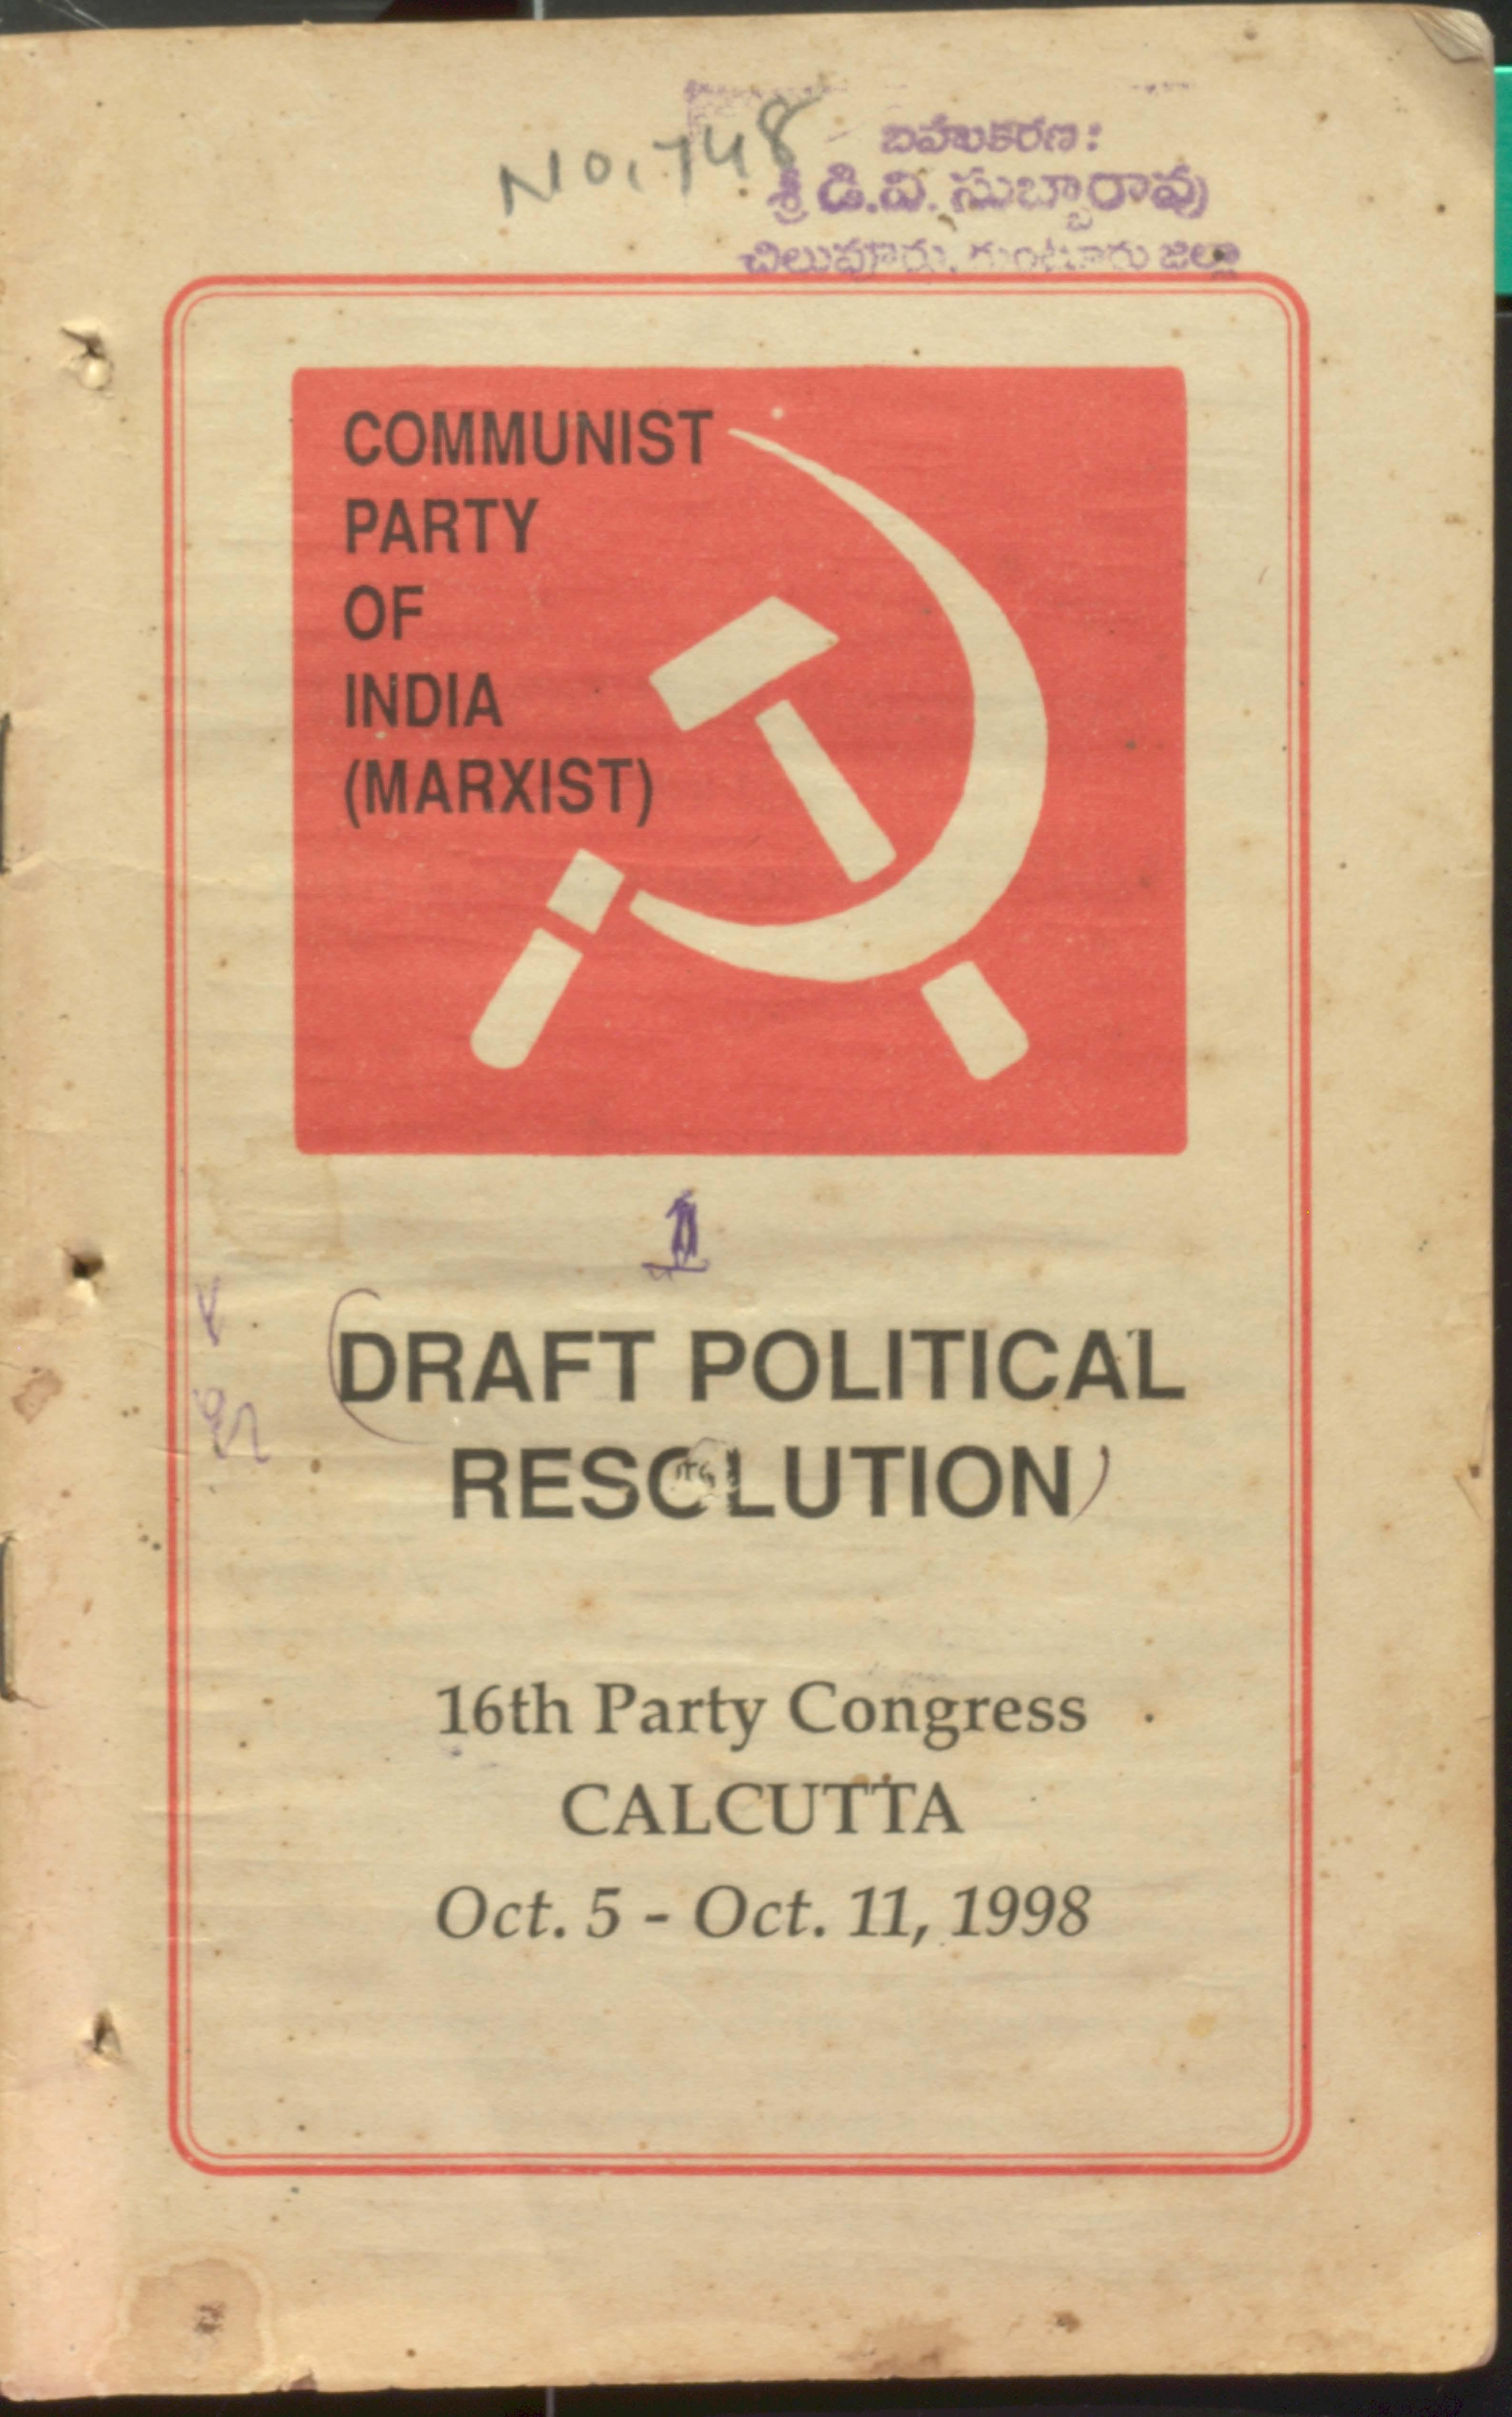 communist party of india (marxist) draft political resoluction oct.5-11,1998